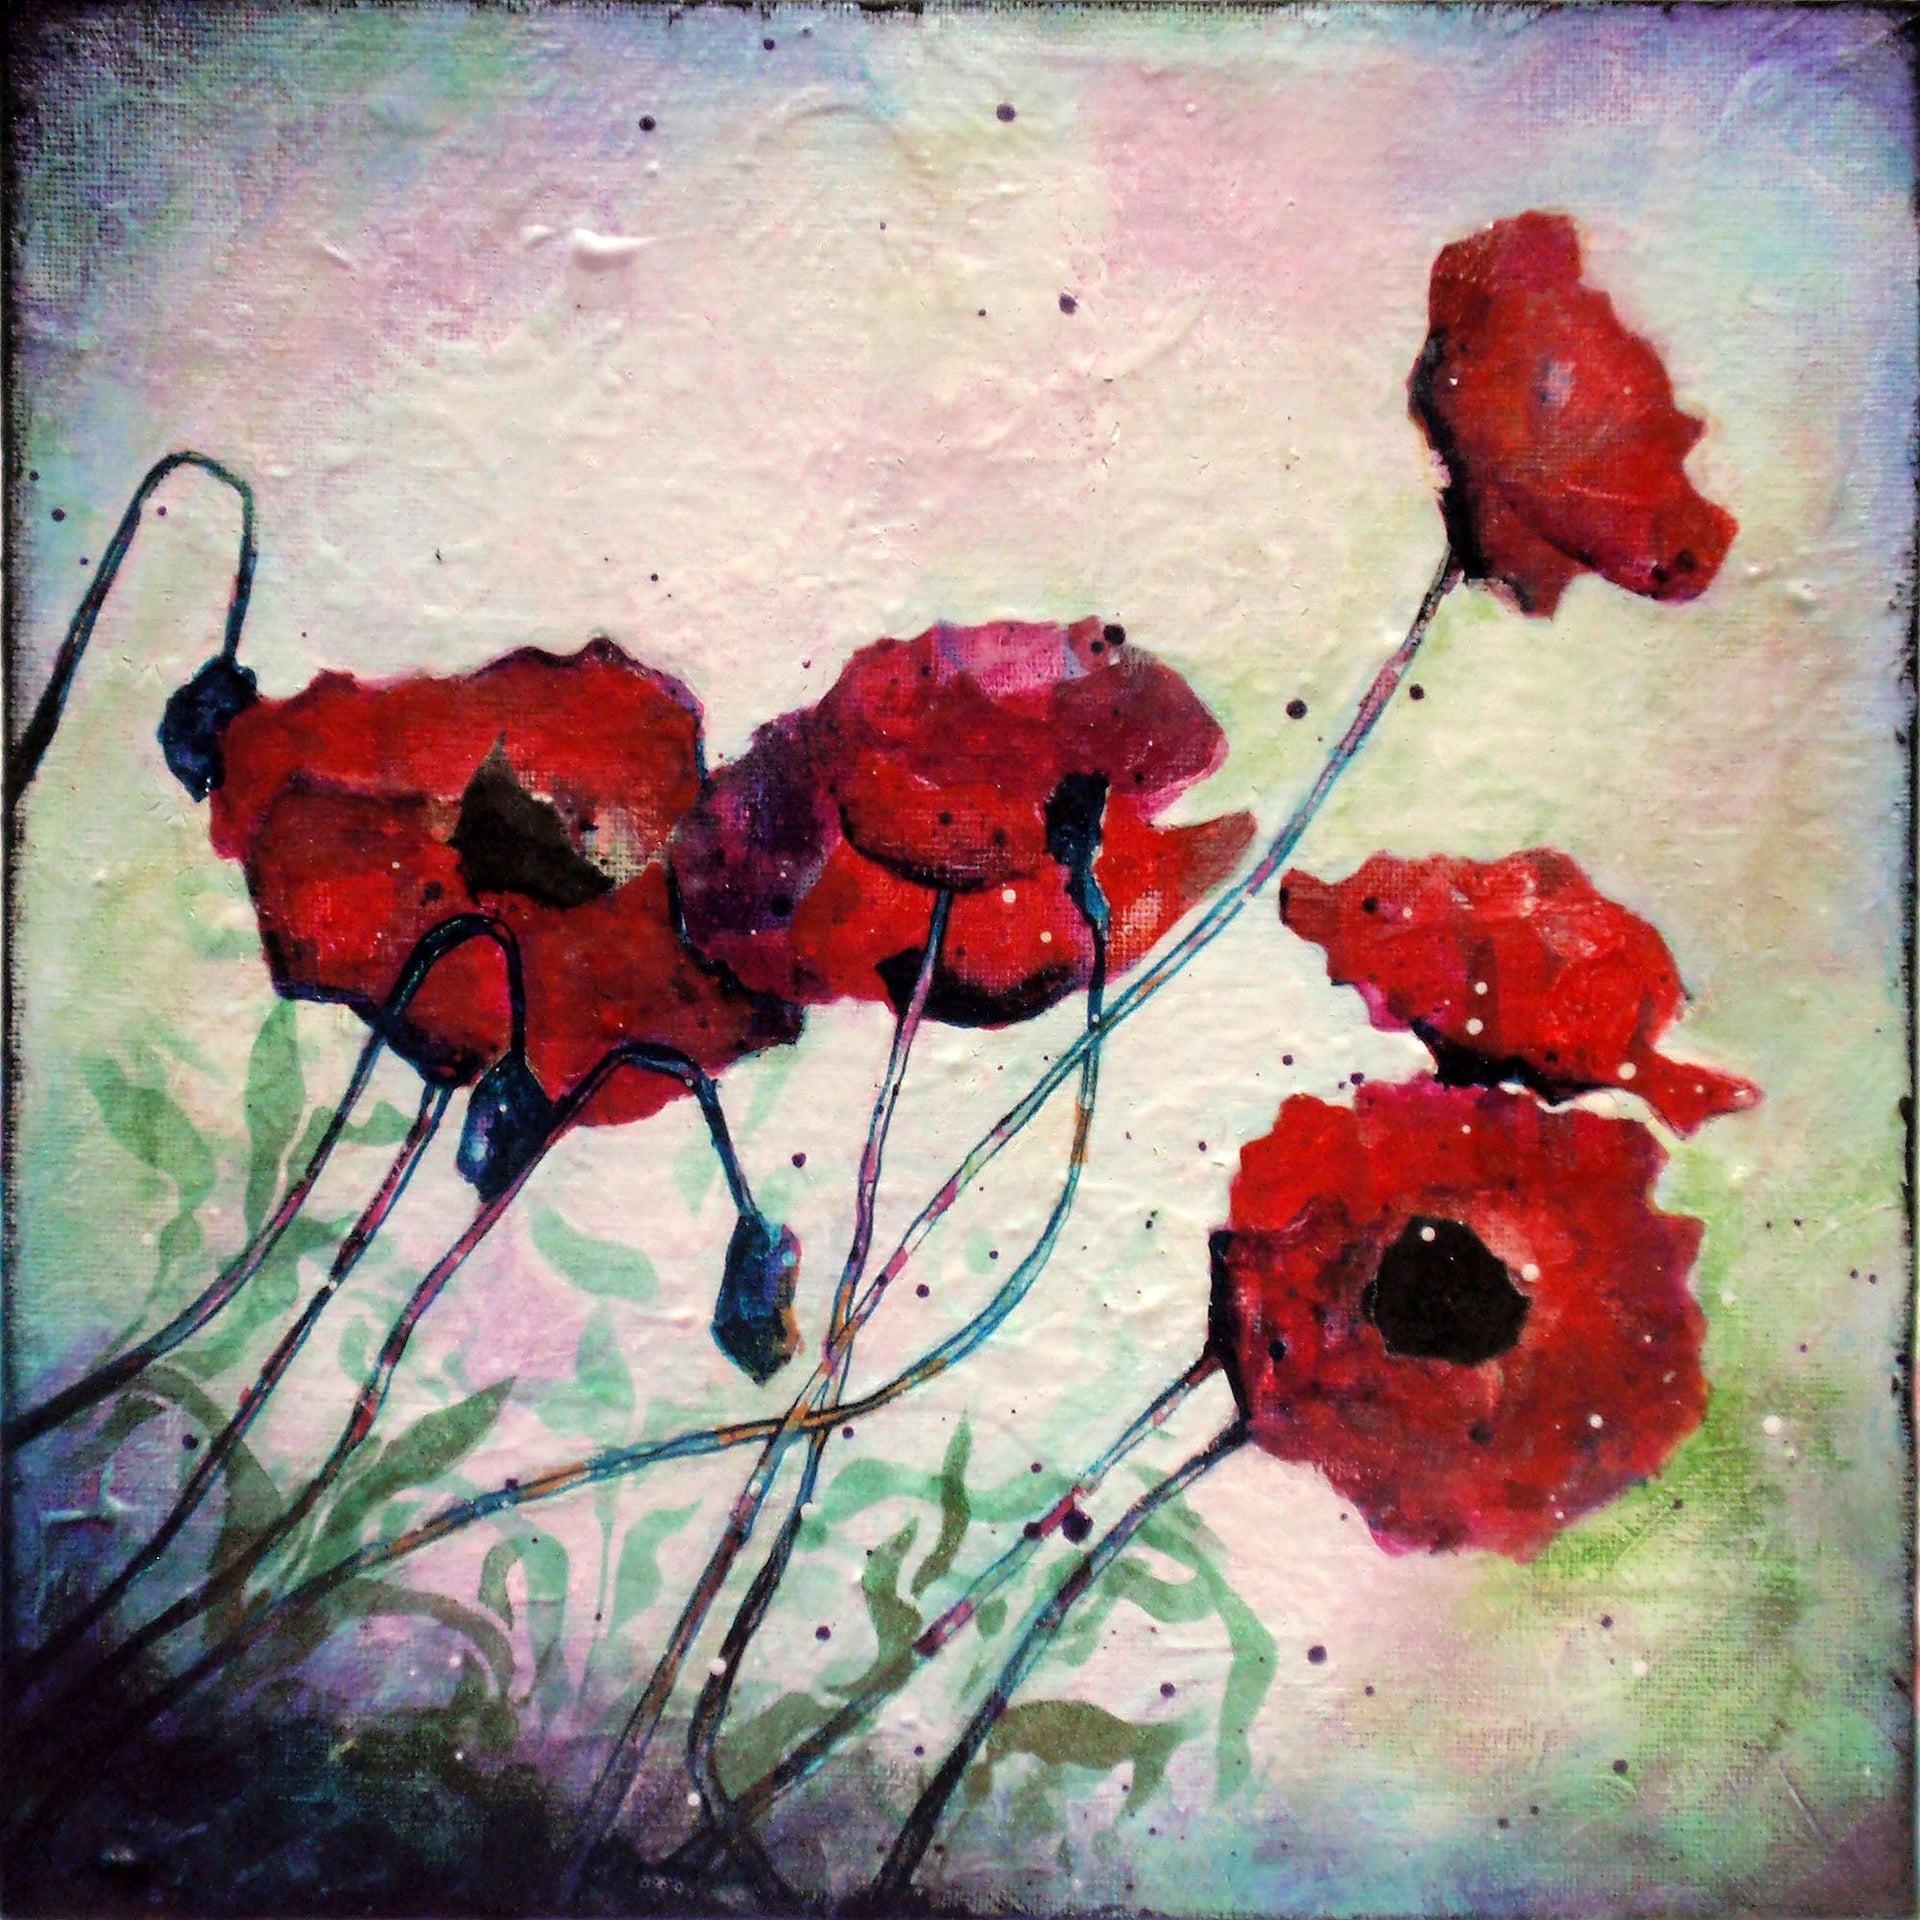 Abstract Poppy Painting: Beginner Acrylic Painting Project